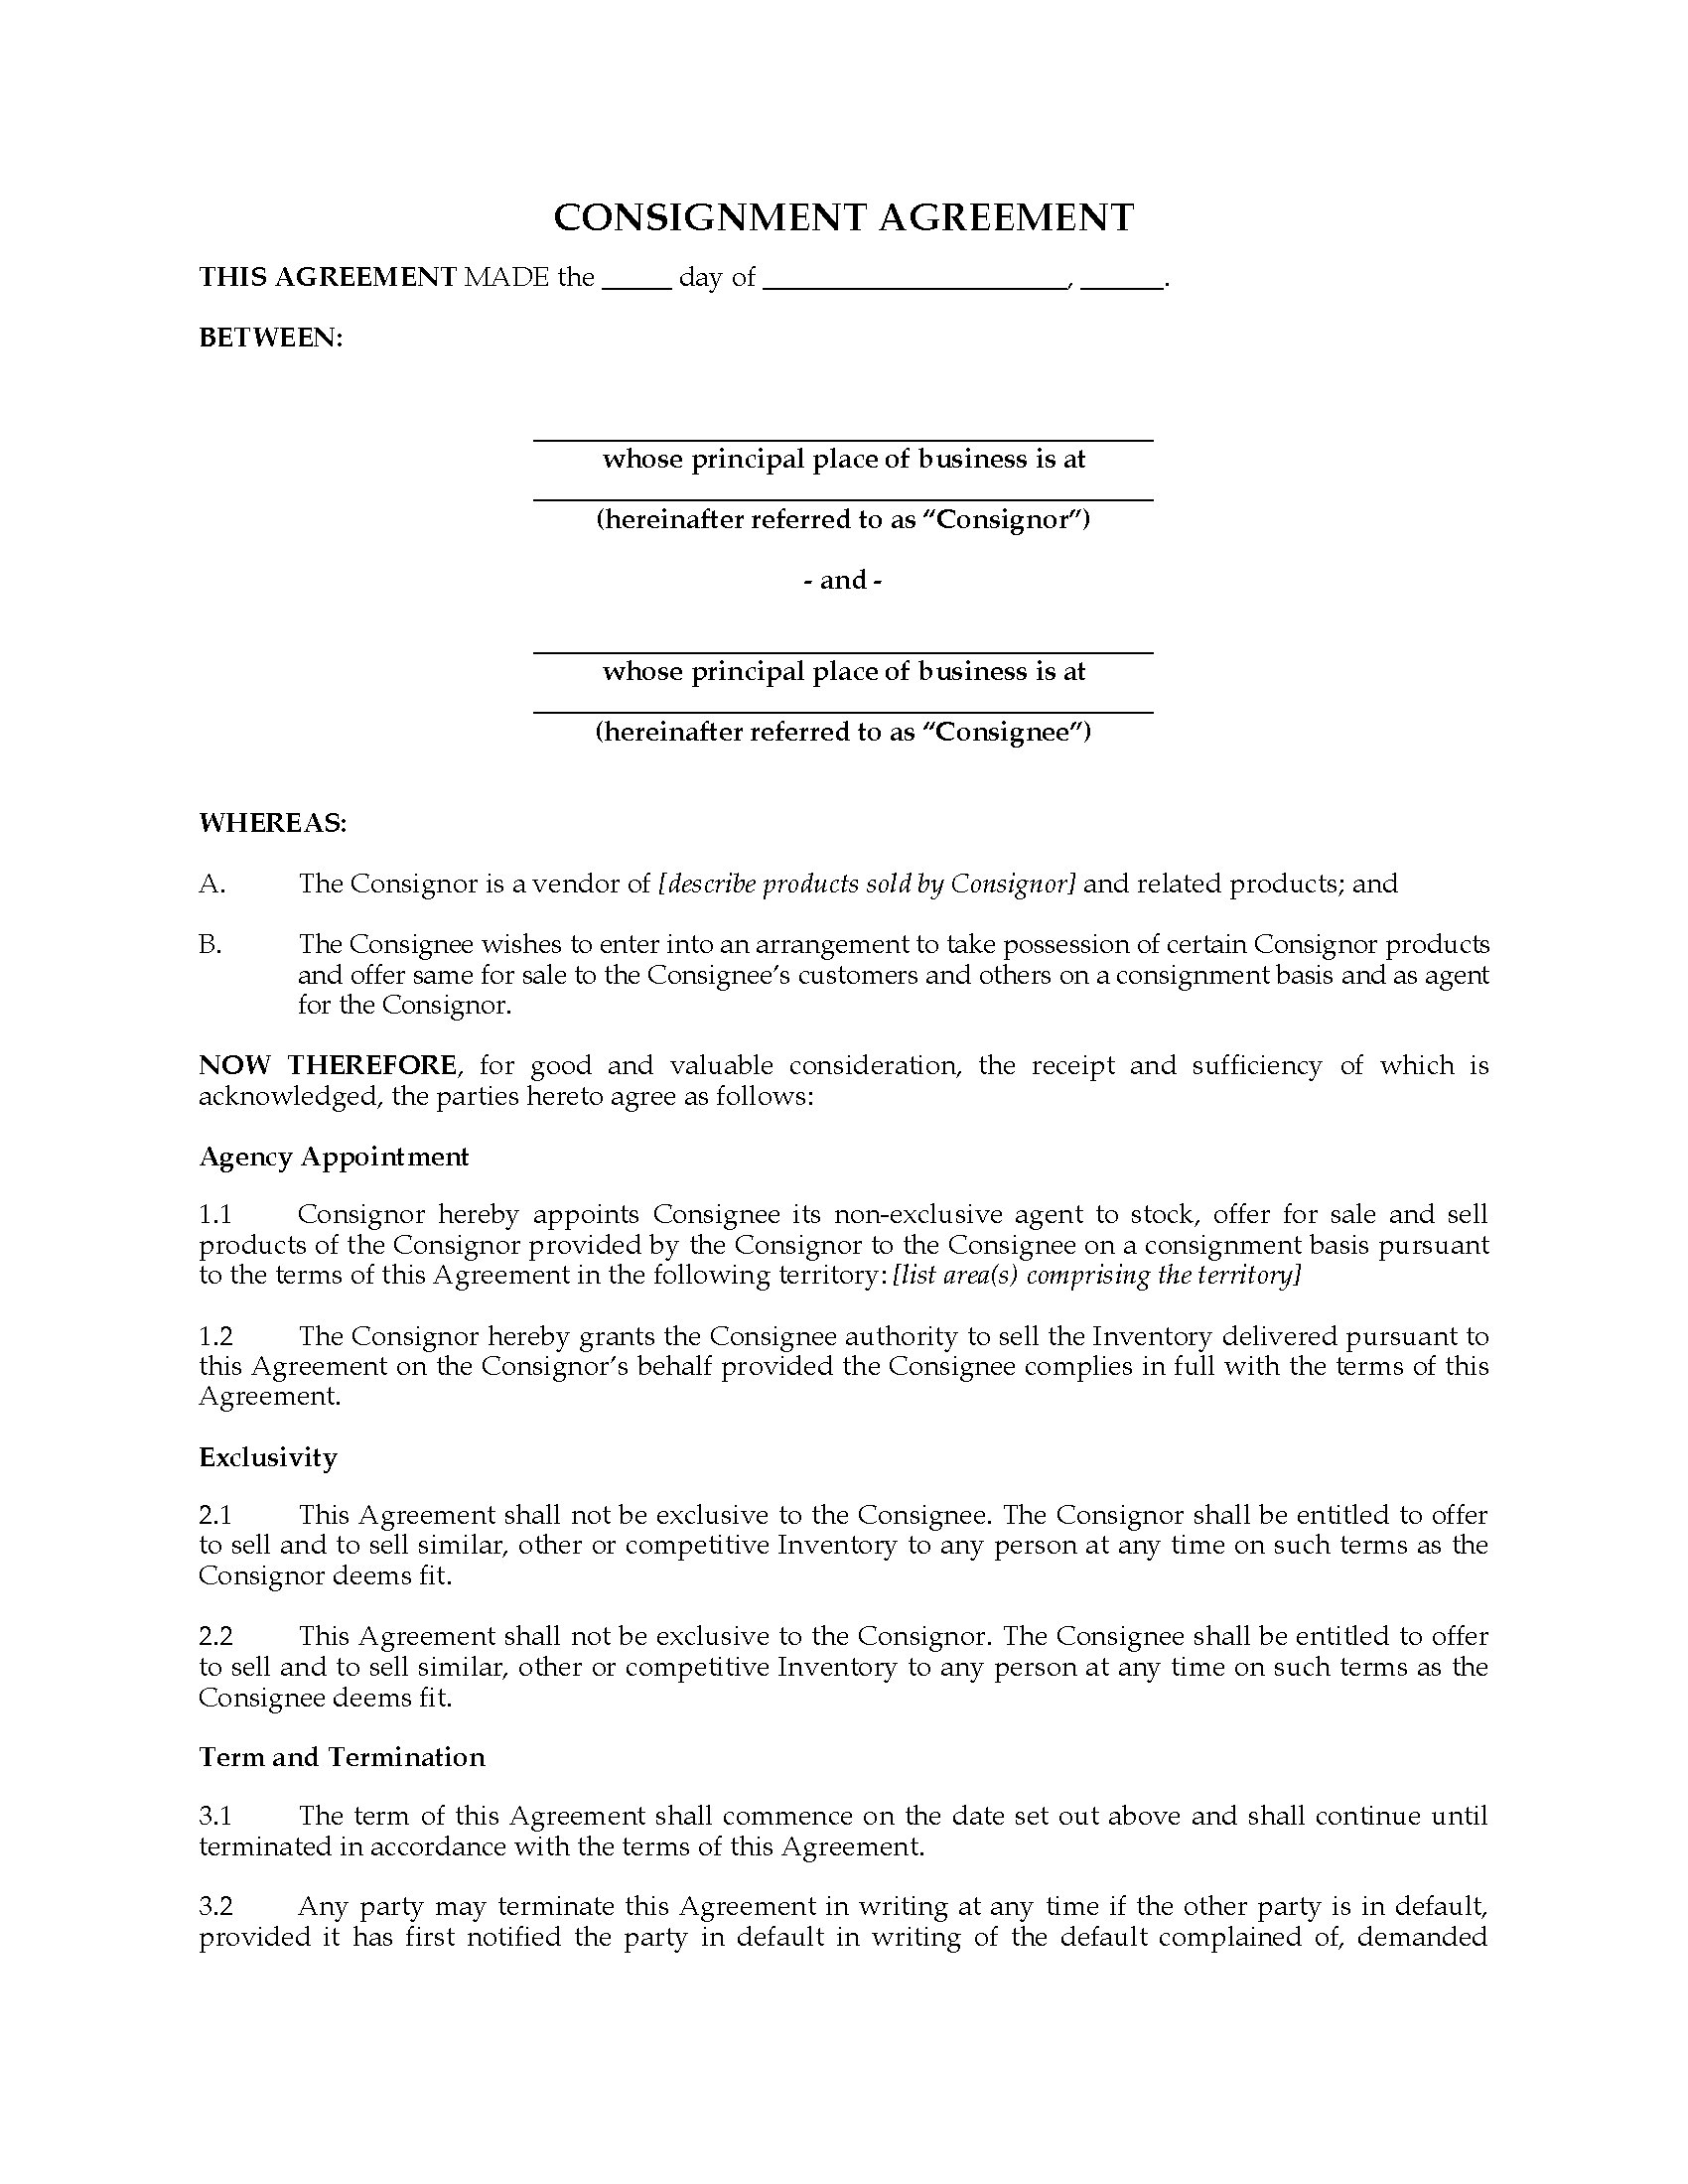 Inventory Consignment Agreement Ontario Consignment Agreement For Sale Of Products